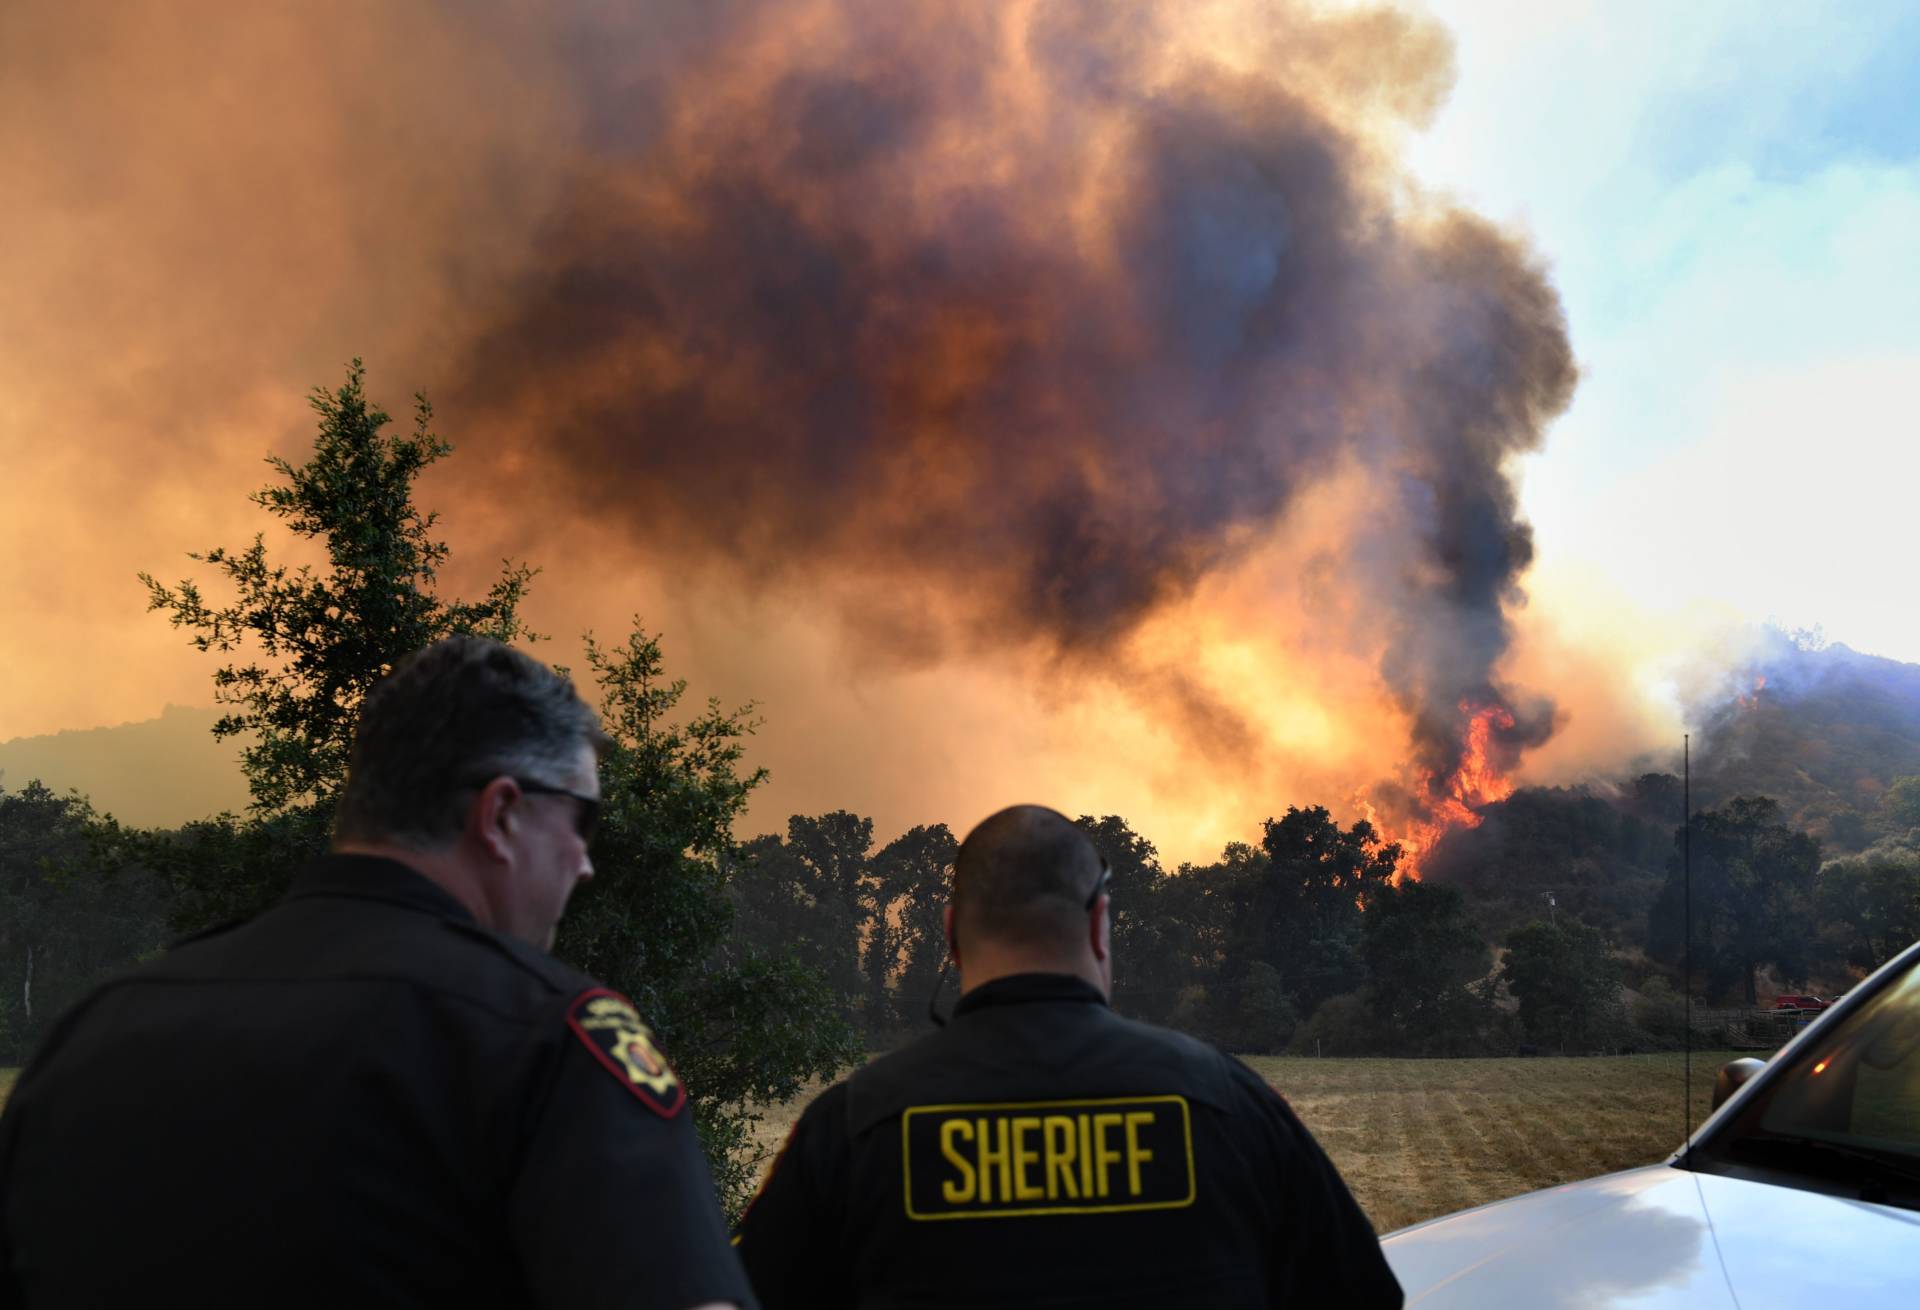 The town Sheriff watches the wind swept flames from the River fire as it again threatens the town of Lakeport on August 3, 2018.  MARK RALSTON/AFP/Getty Images